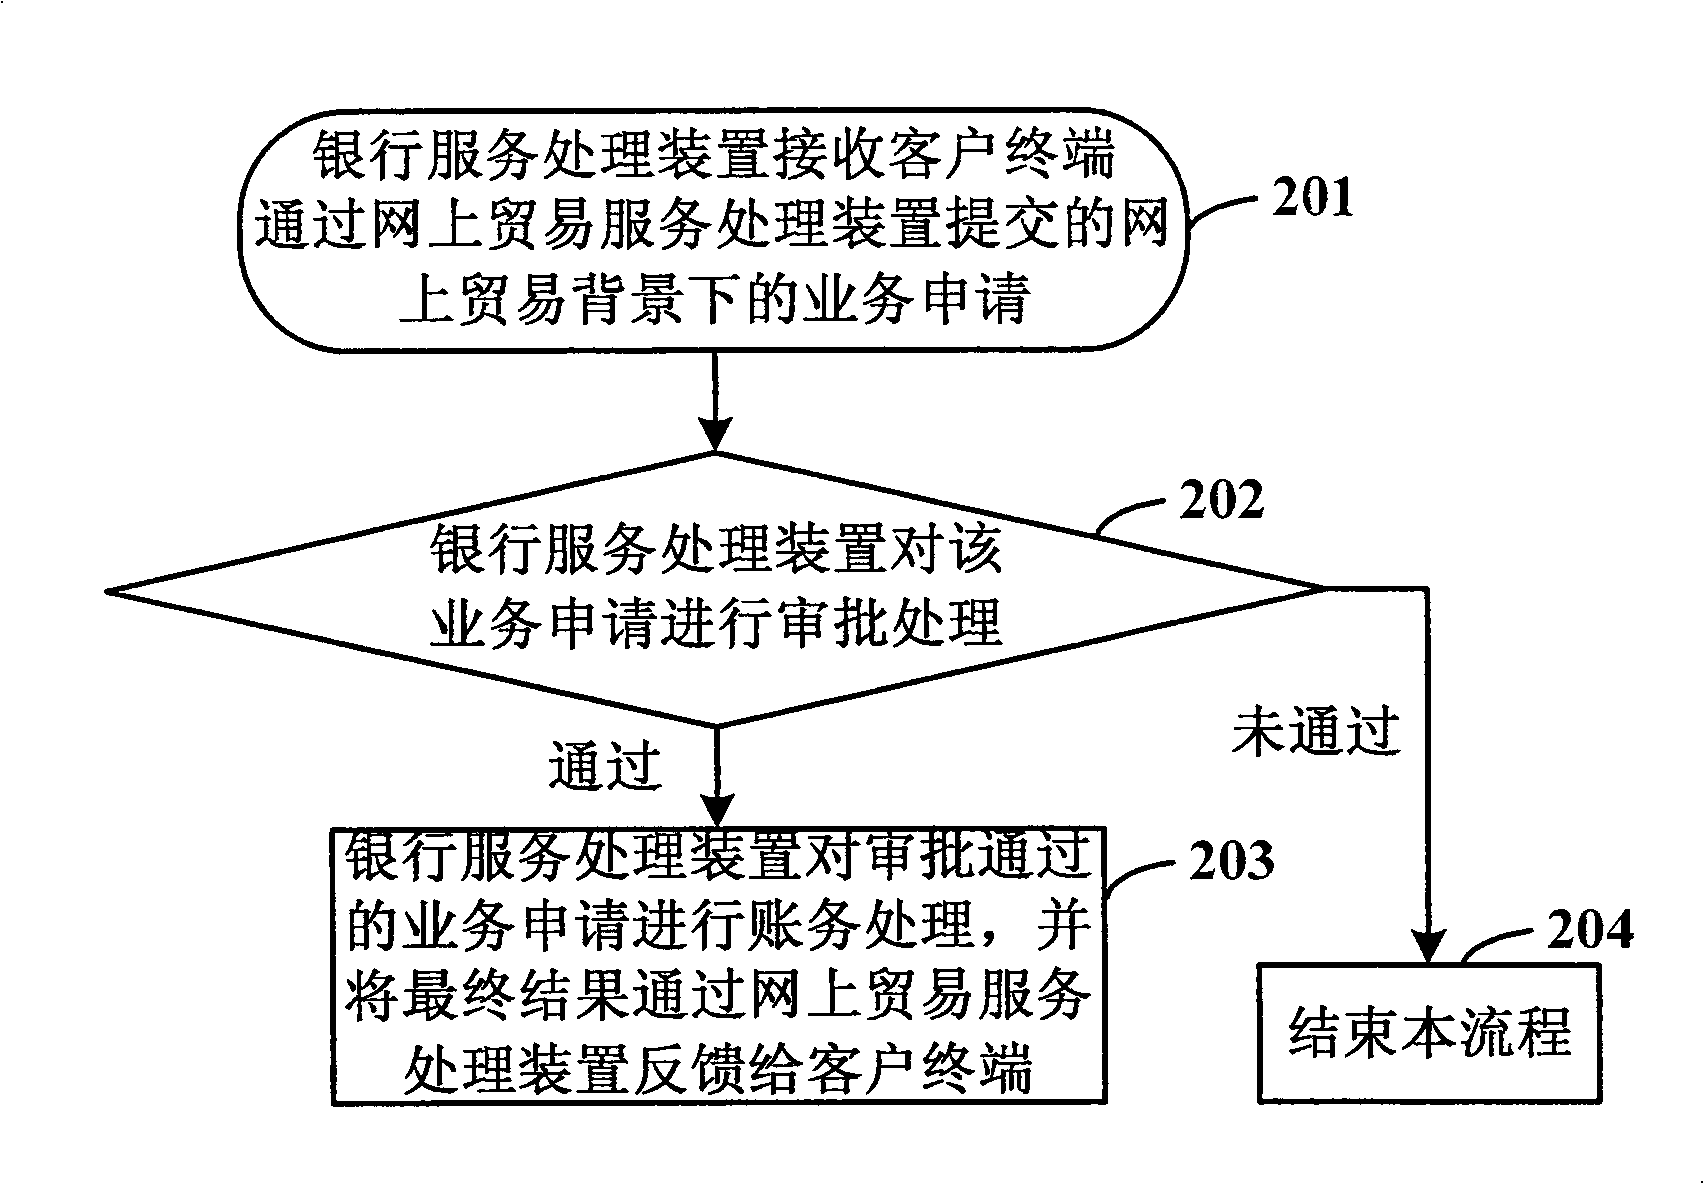 System and method for implementing internet trade guarantee payment and financing